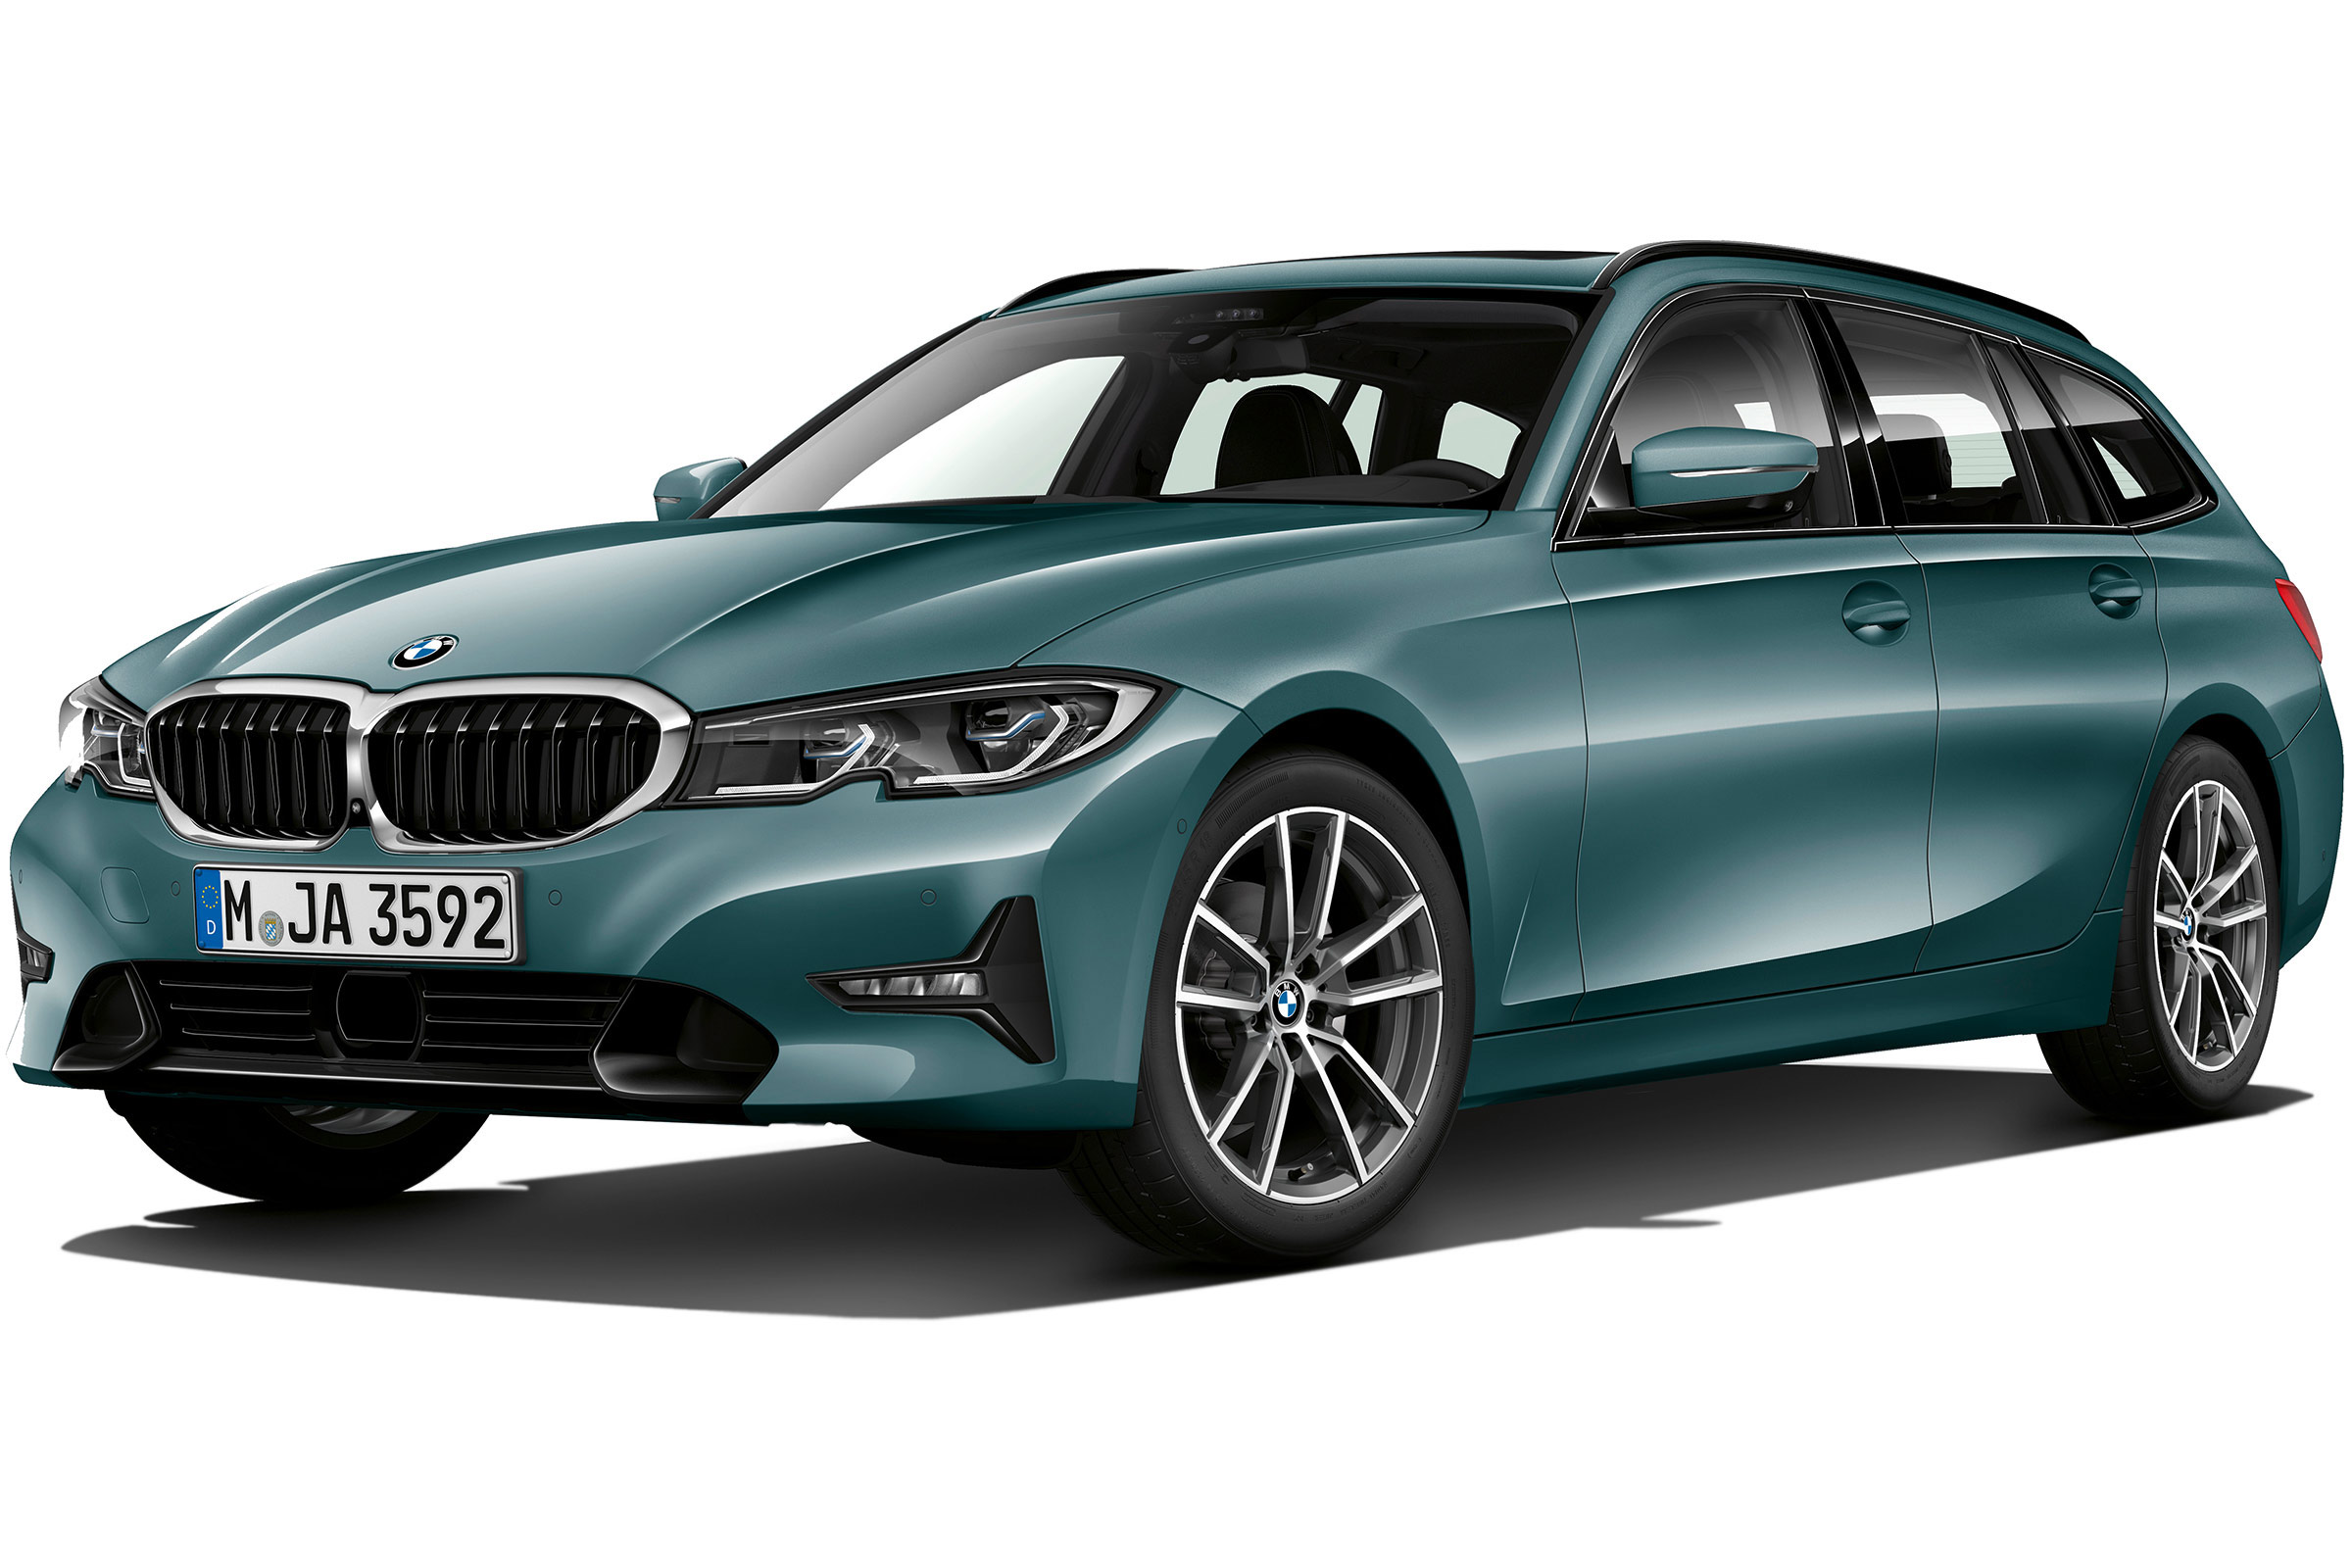 Bmw 3 Series Touring Estate Engines Drive Performance Review Carbuyer